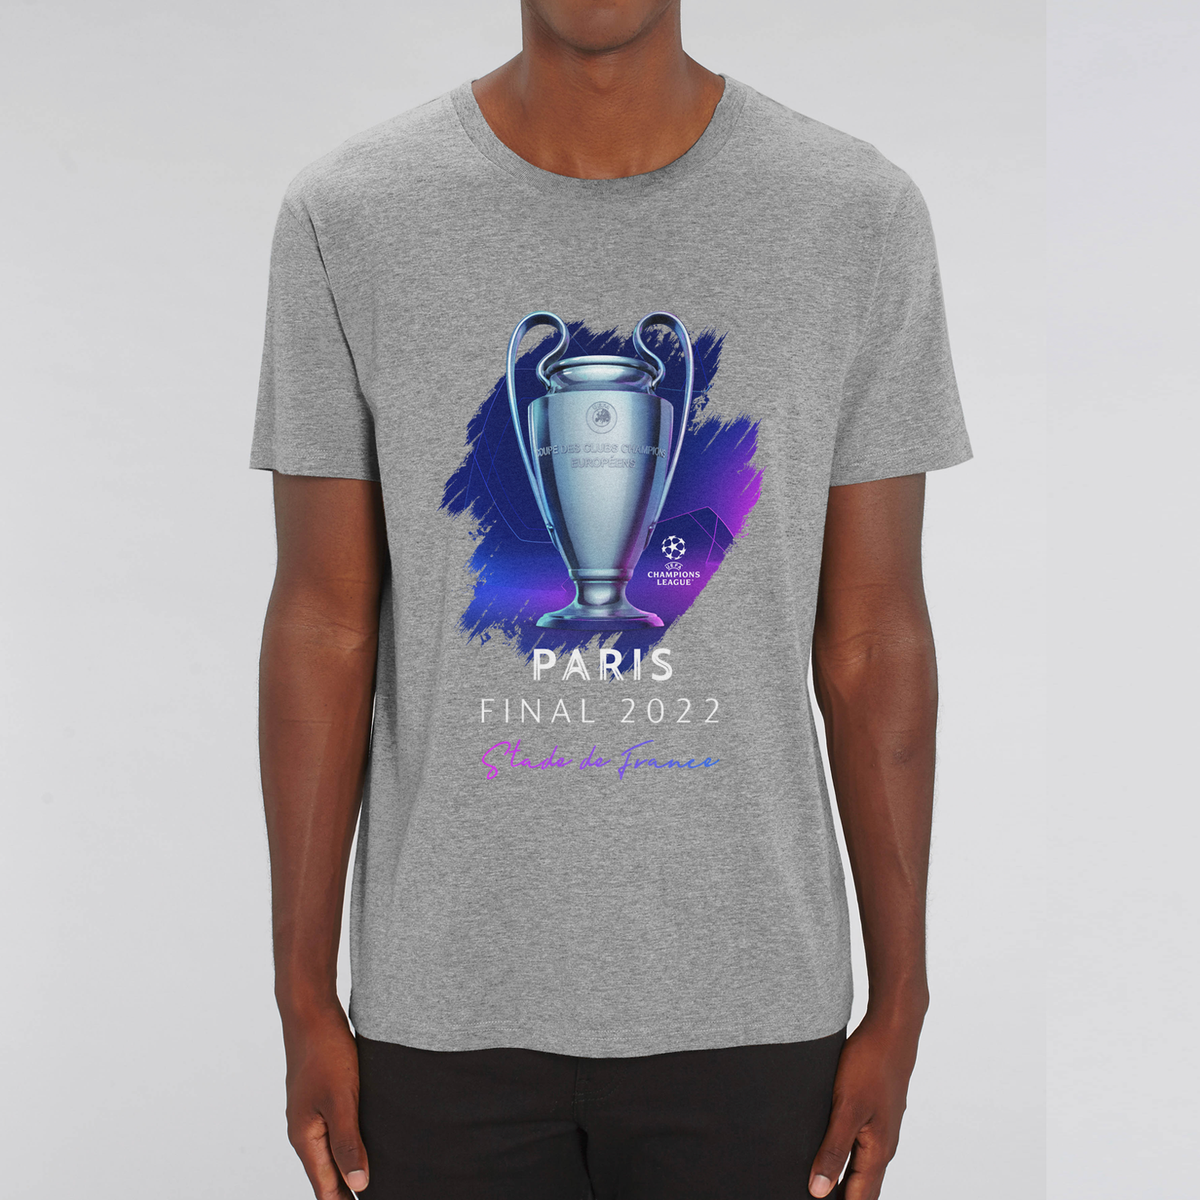 UCL Final 2022 Trophy T-Shirt UEFA Club Competitions Online Store